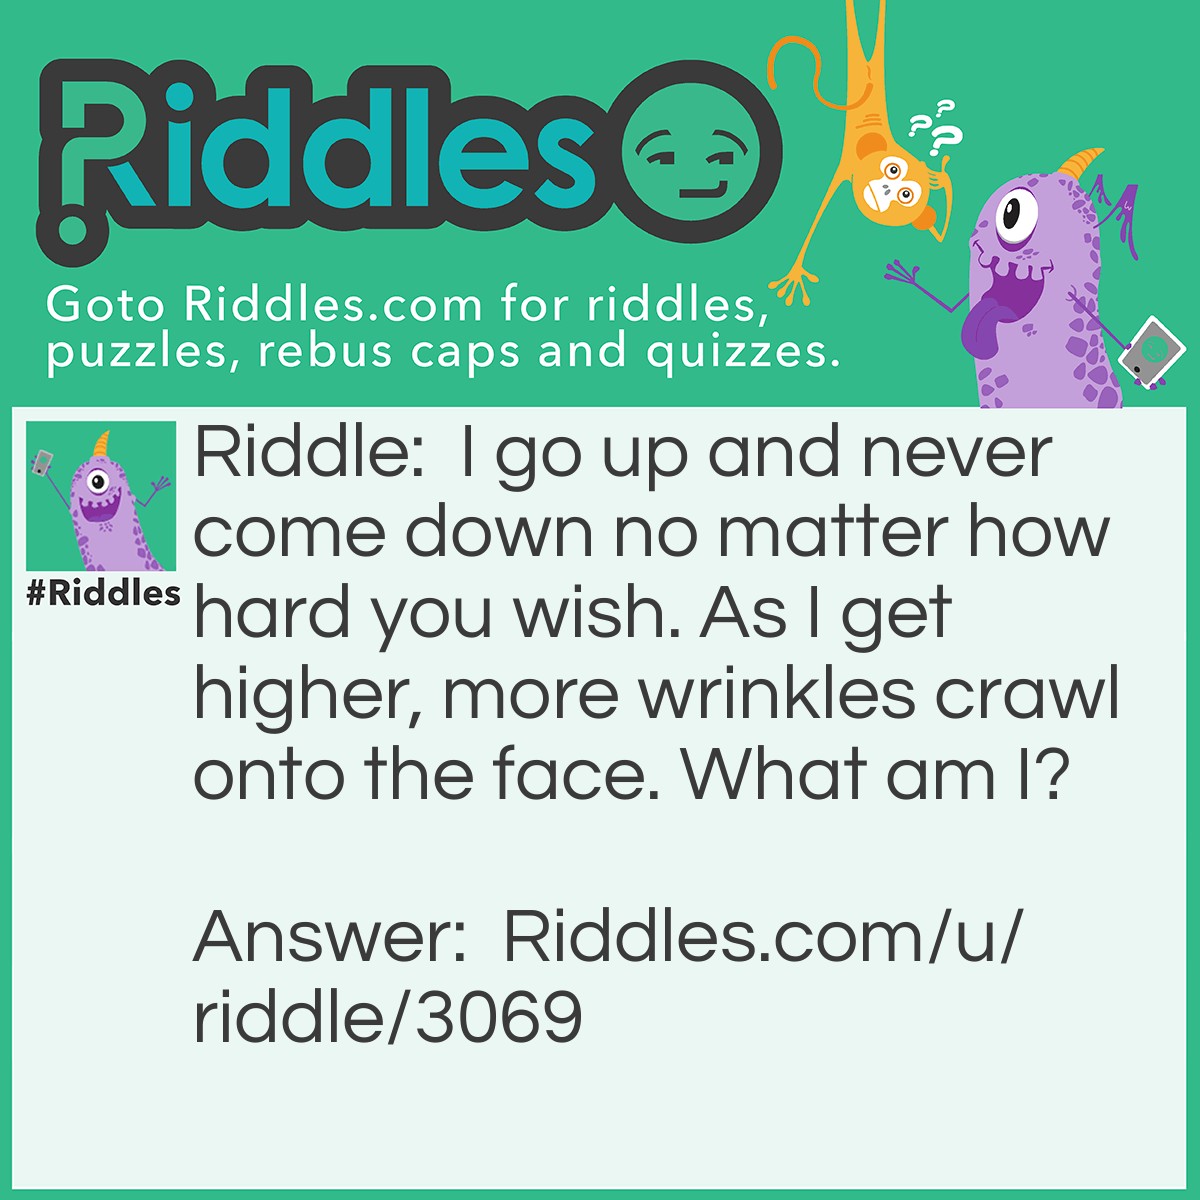 Riddle: I go up and never come down no matter how hard you wish. As I get higher, more wrinkles crawl onto the face. What am I? Answer: Age.